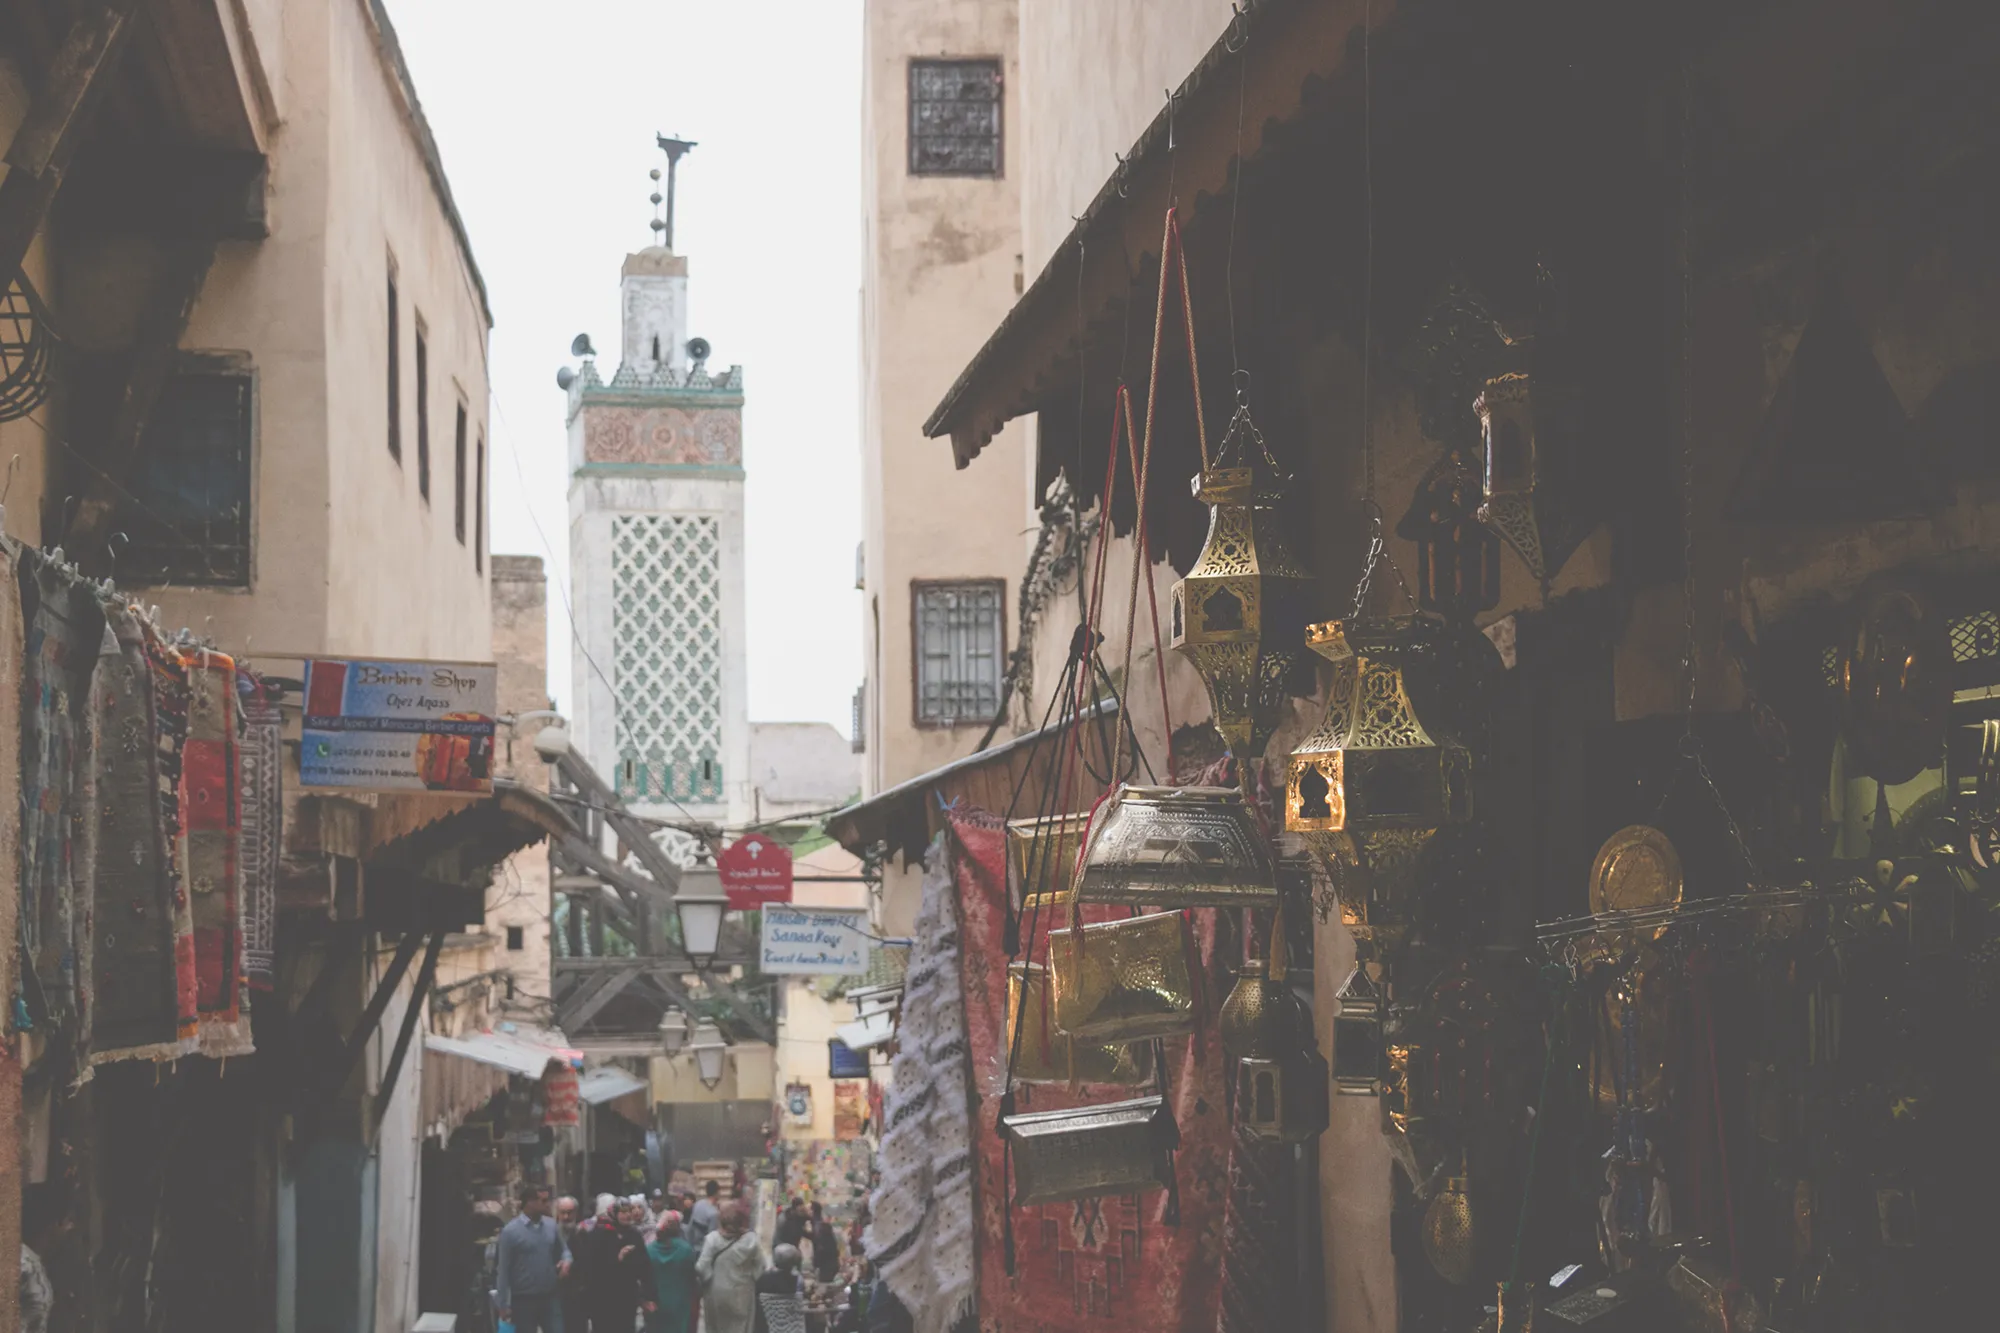 A busy street with many souvenirs in stalls along the side, with the minaret of a Mosque in the background.